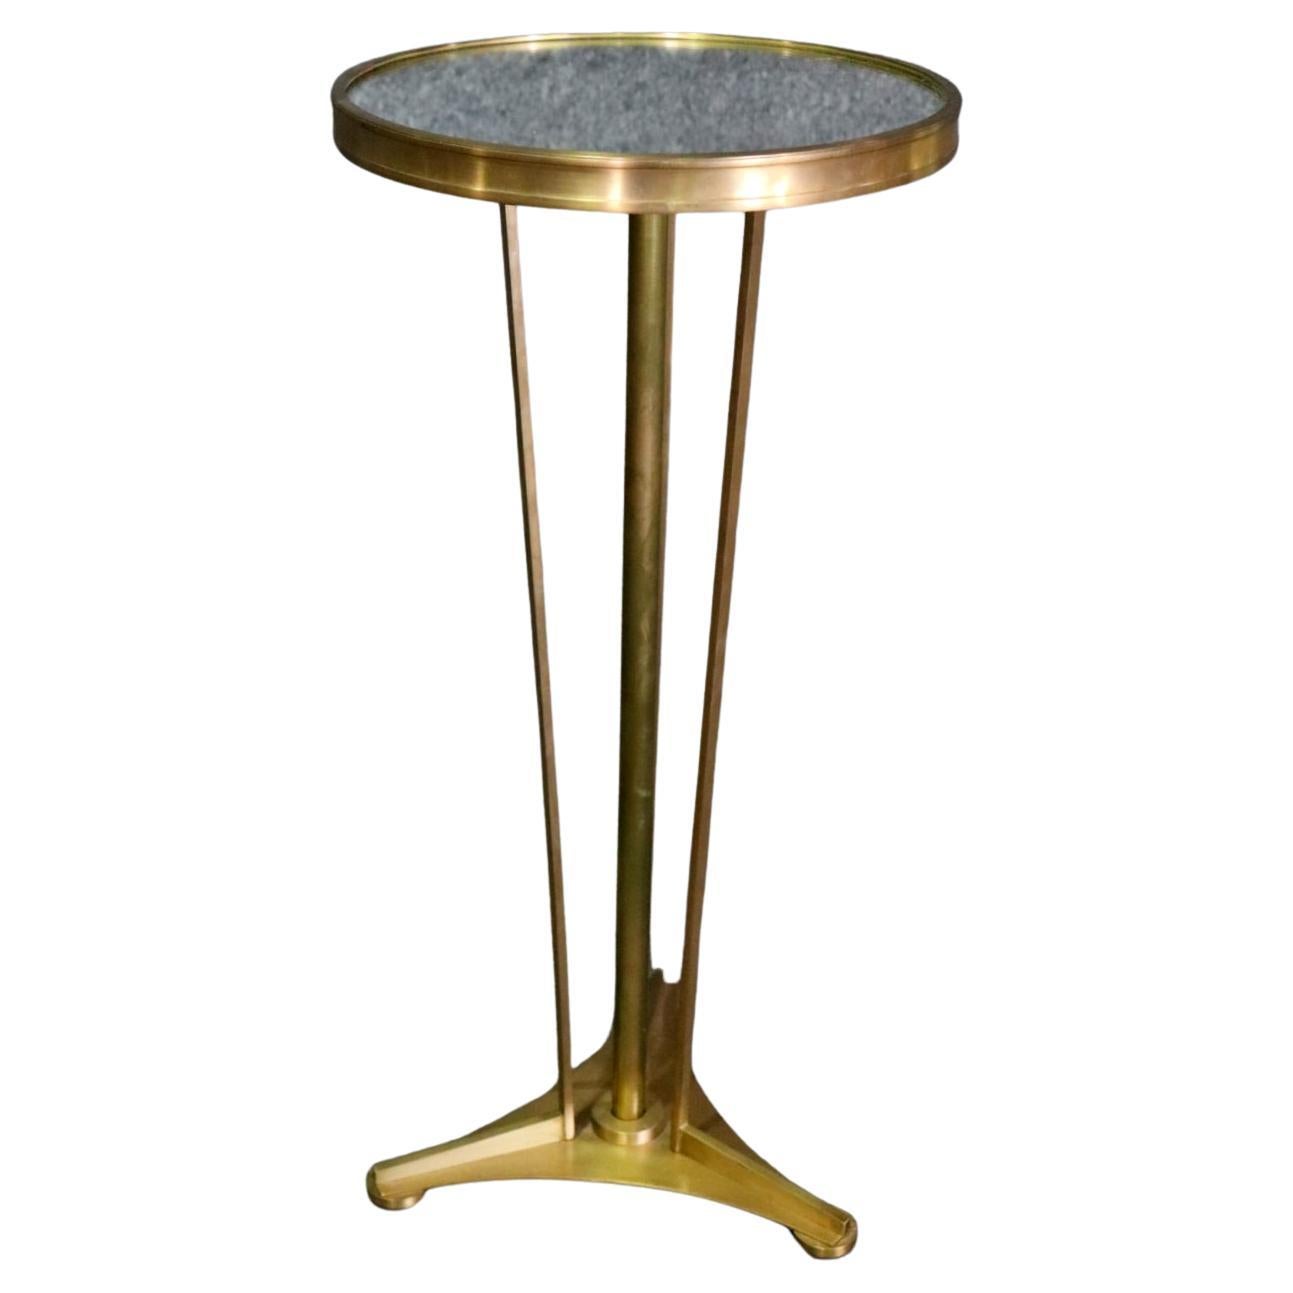 Small Mirror Top Brass Art Deco Style Gueridon End Table For Sale